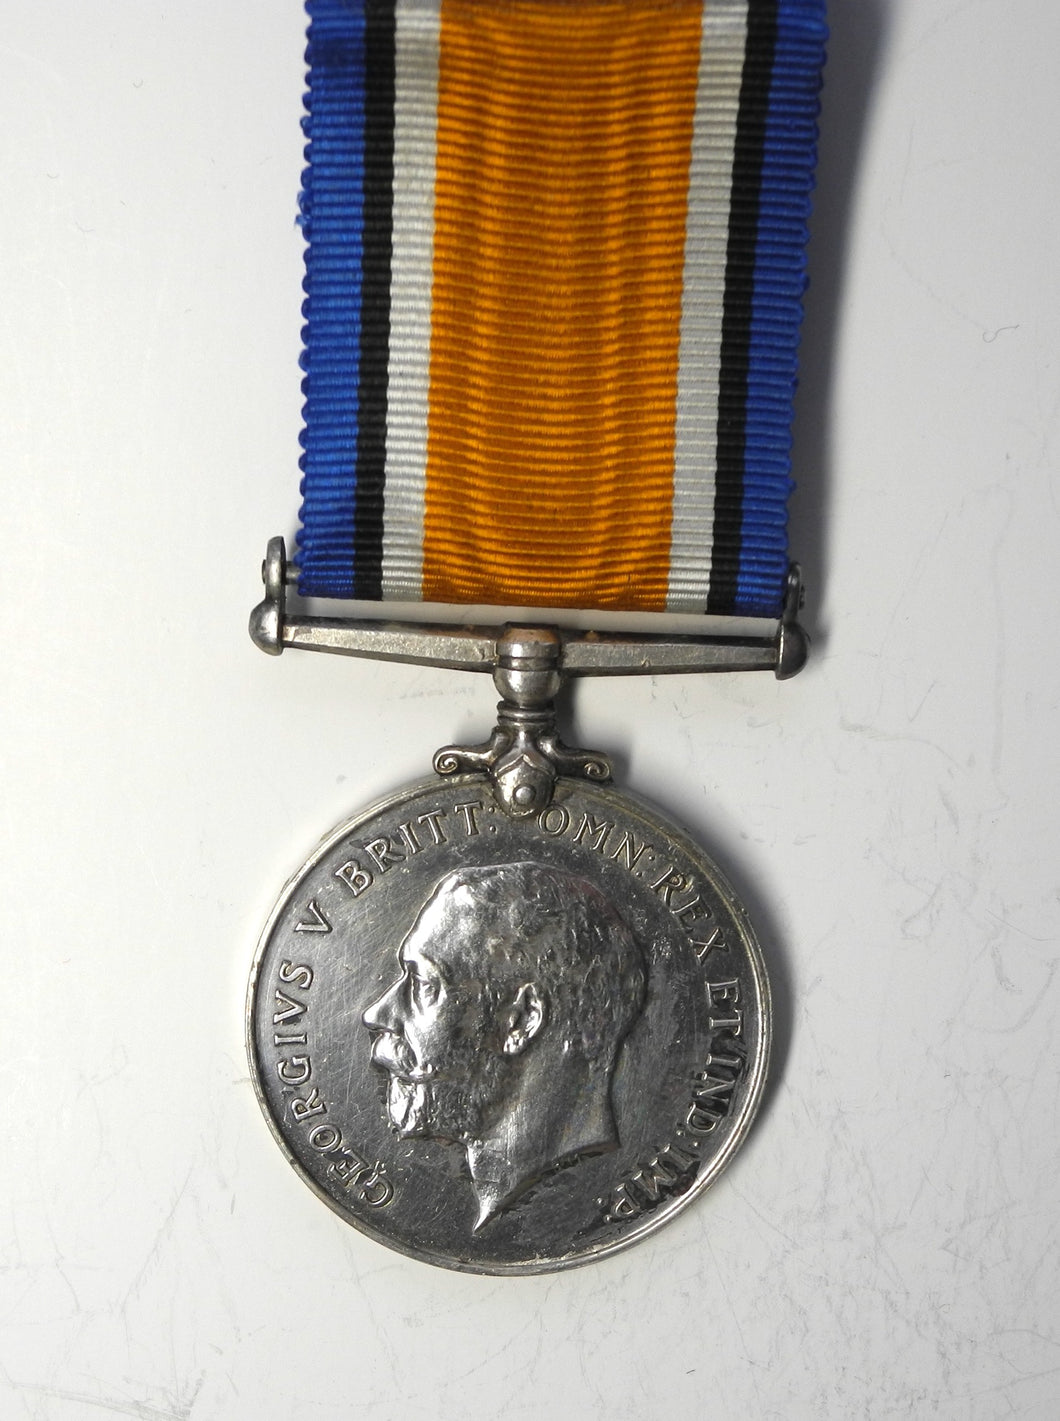 British War Medal, 1914-19: 186806 Pte W. Shenton. 90-Can Inf.